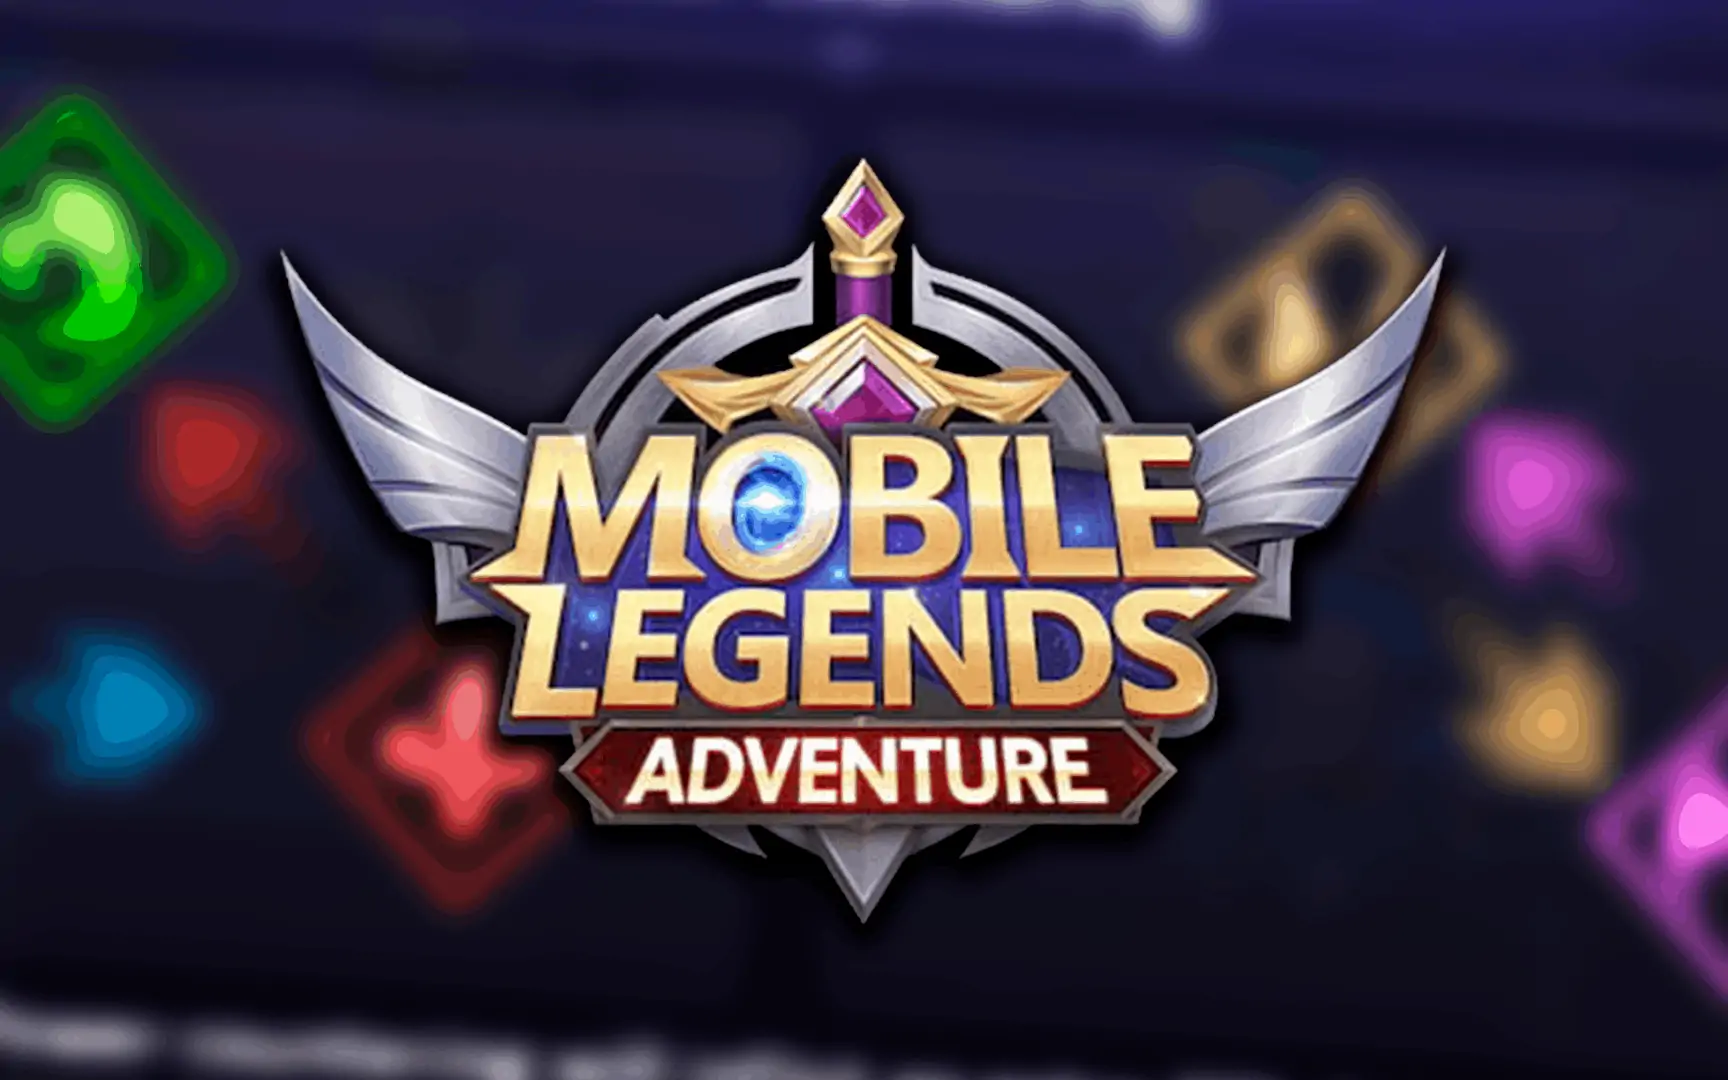 You are currently viewing Faction/Power Advantages Guide – Mobile Legends: Adventure